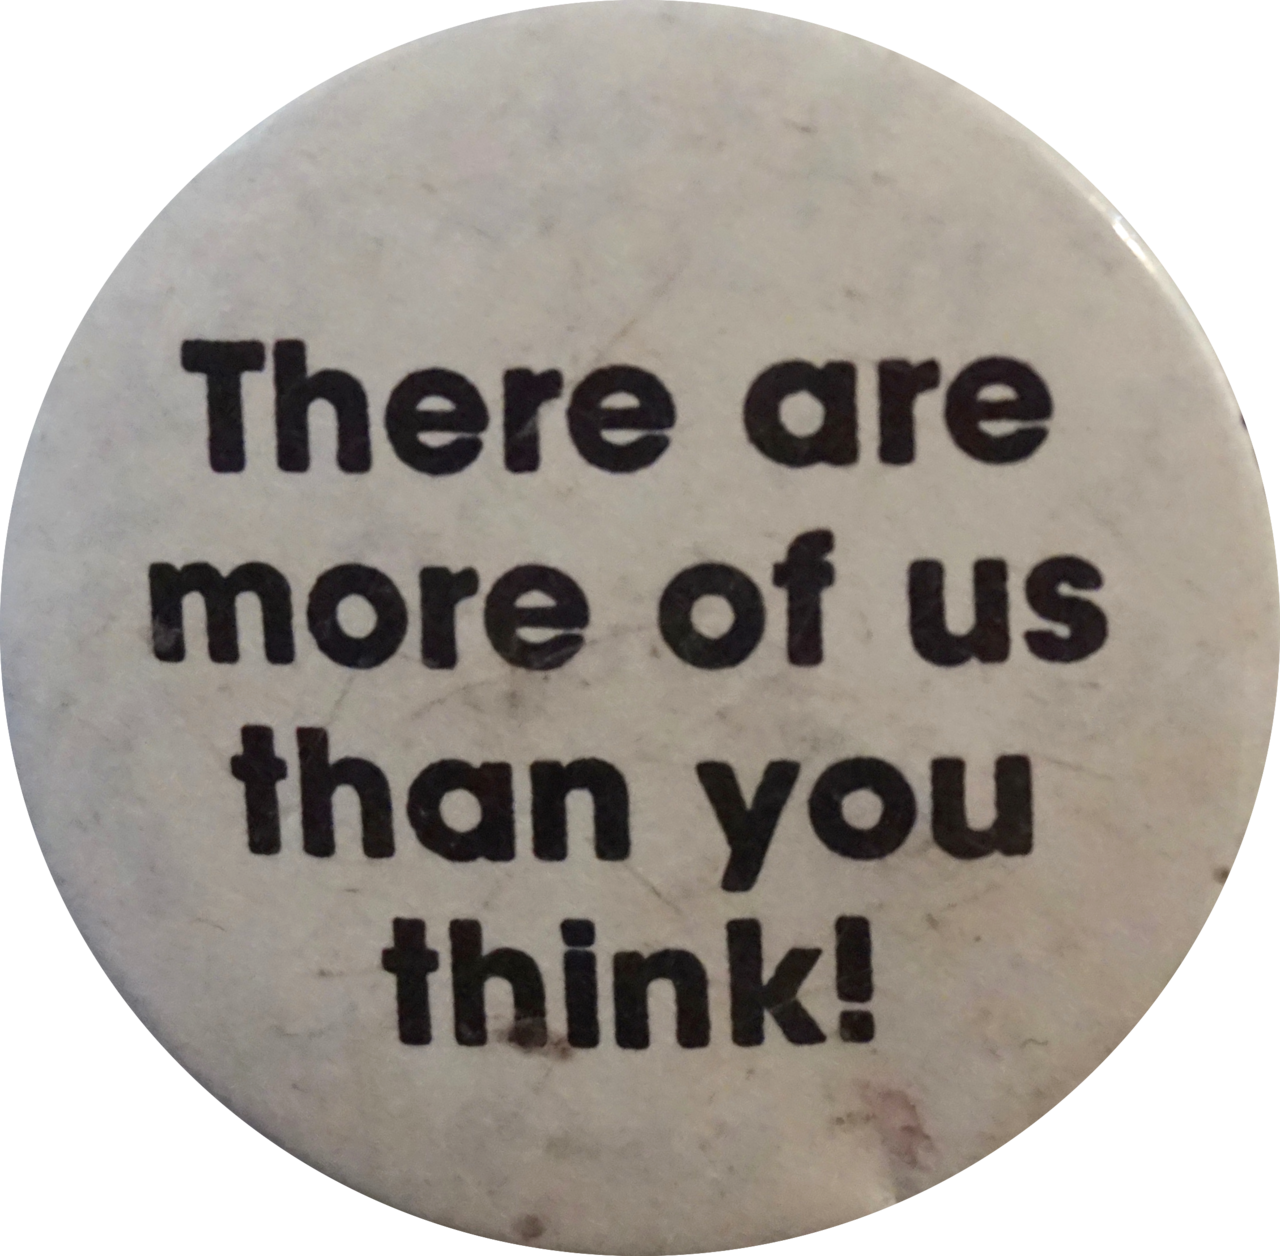 Image Description: A photo of a worn circular pin that says 'There are more of us than you think!' in bold black text on white background.